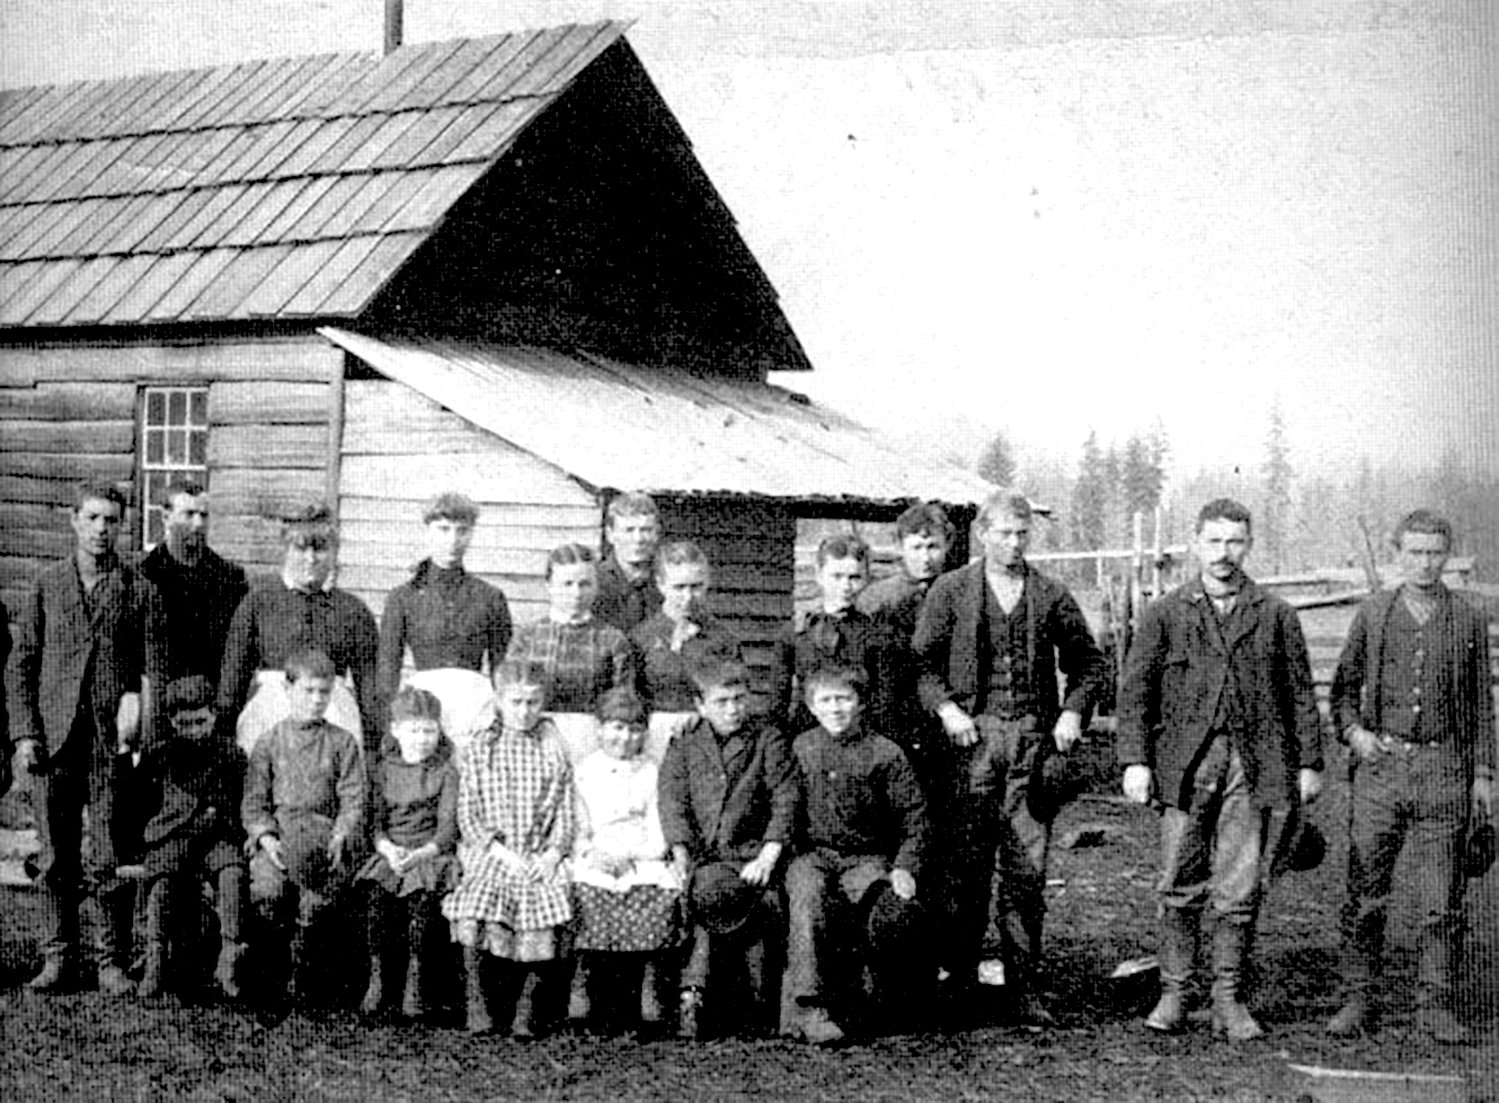 The first Pe Ell school was built in 1884 and was located, approximately, at the intersection of Mauerman Road and Leach Road, 1.5 miles northeast from Pe Ell. It later moved to the Kroll farm, which was used to house pigs. This happy bunch are some of the first settlers of Pe Ell. Those pictured from the left of the back row include Bill Hendrick, Mauermann, Charley Damitz, Cal Carron, Emma Mauermann, May Hendrick, Stearns (teacher’s friend) and Erve and Maine Willard. Those pictured from the left of the front row include Albert and Charley Mauermann, Daisy and Hattie Hendrick, Verna Jones, Bruce Jones and Frank Hadley.